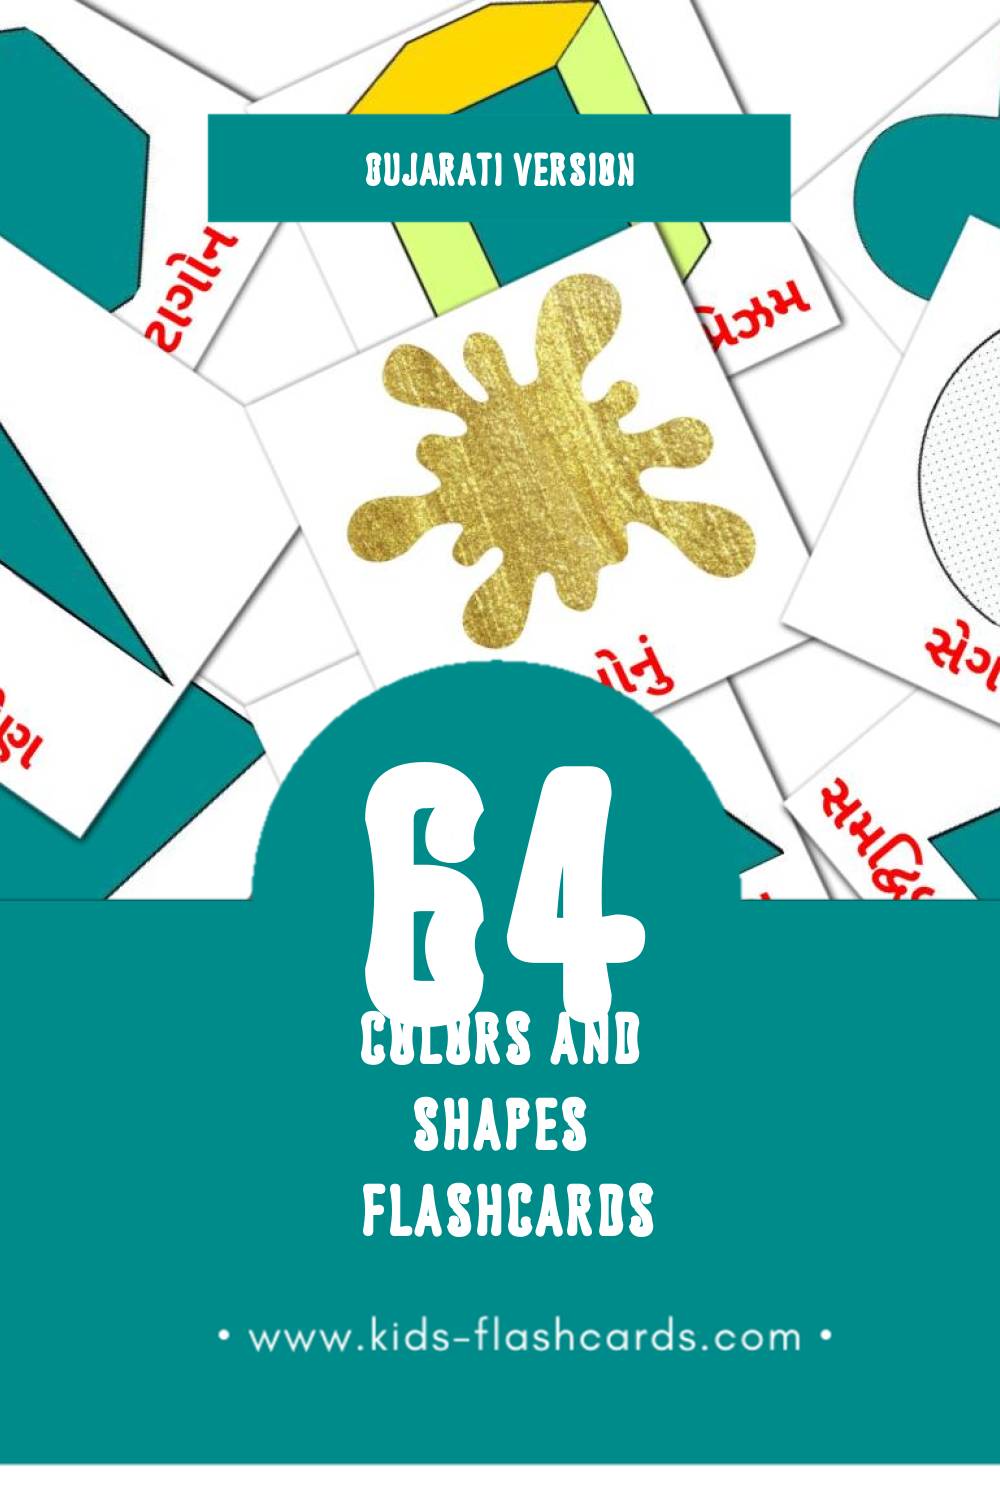 Visual રંગો અને આકાર Flashcards for Toddlers (64 cards in Gujarati)